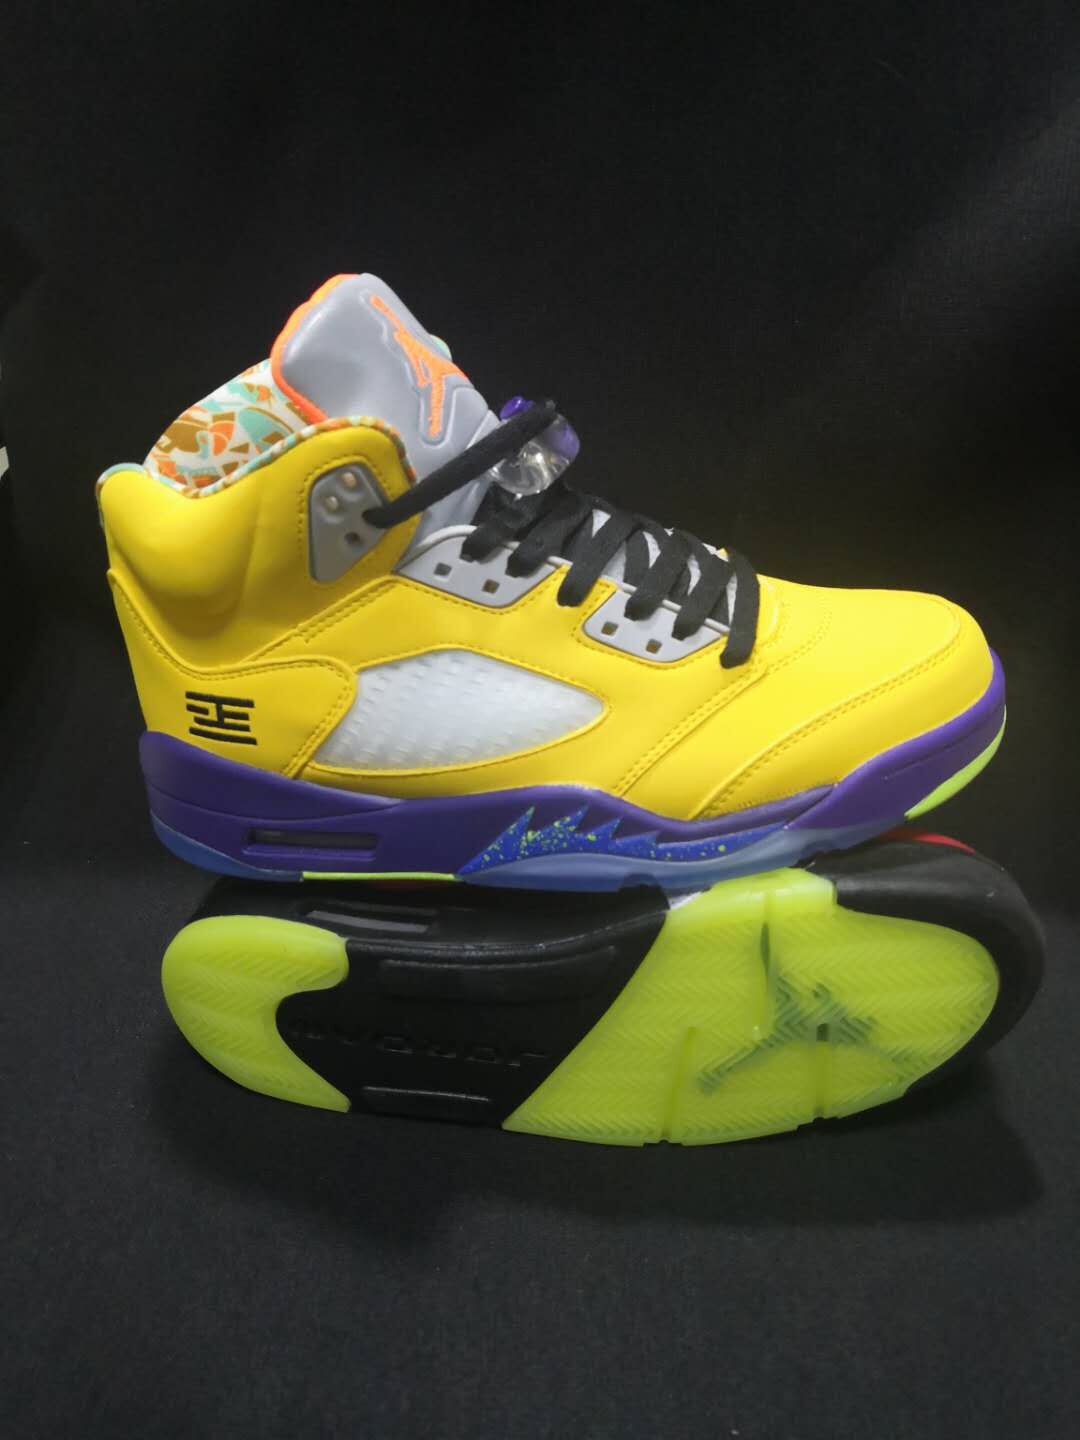 What the AJ5 of 2020 Air Jordan 5 Shoes Red Yellow